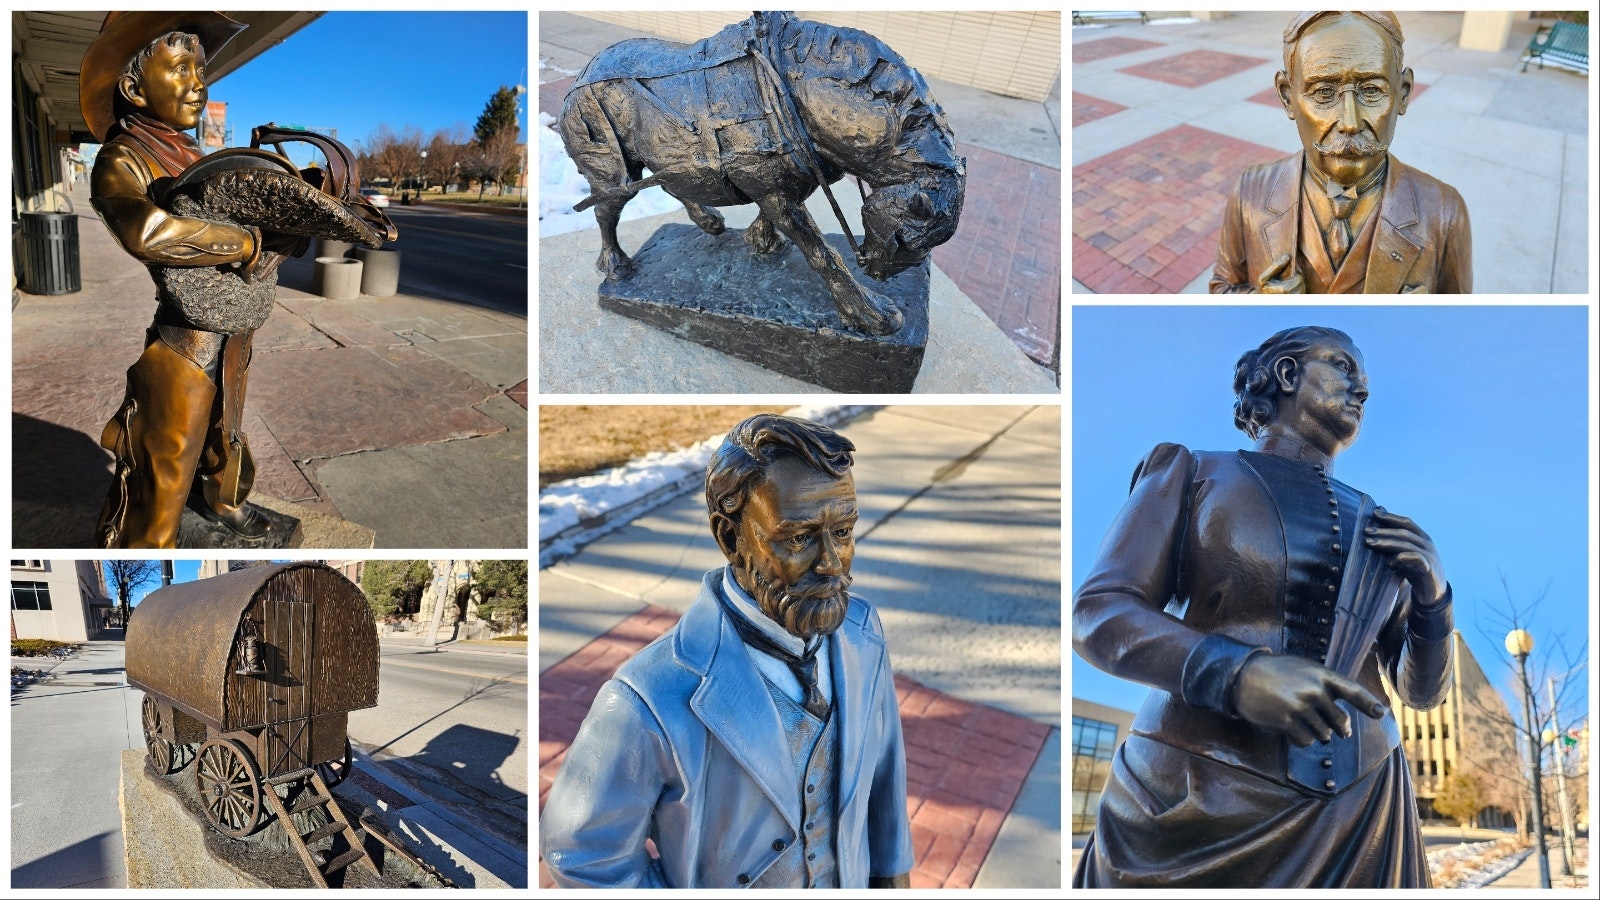 Clockwise from top left: Rarin' to Ride by George Linden, donated by Dennis and Jeff Wallace, and Wyoming Bank & Trust; Sheep Wagon by Tanner Loren, donors Fred and Karen Emerich; George Rainsford by Joel Turner, donors Rick and Abby Davis; Therese Jenkins, sculpted by Joel Turner; Sen. Francis E. Warren by Guadalupe Barajas, donated by Wyoming Angus Ranch; Earning His Oats by Del Pettigrew, donated by Tara Nethercott.